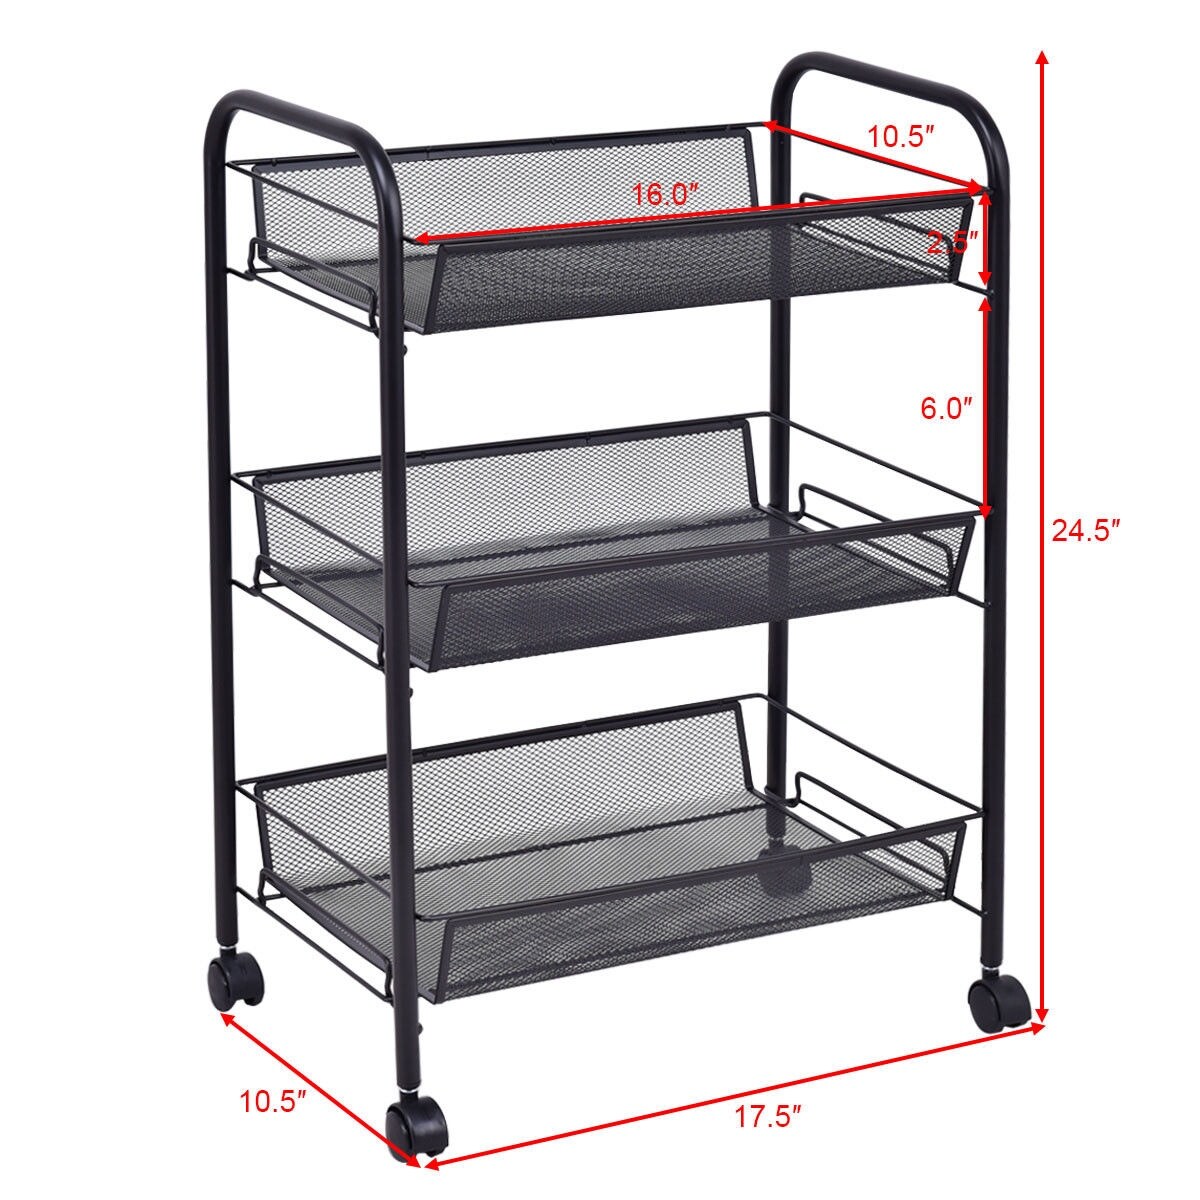 Multi-Purpose Storage Organizer Cart for Kitchen Bathroom Office Grey, 44 x 18 x 70cm Metal Utility Shelves with Mesh Baskets and Wheels COSTWAY 3/5 Tiers Rolling Trolley Cart 